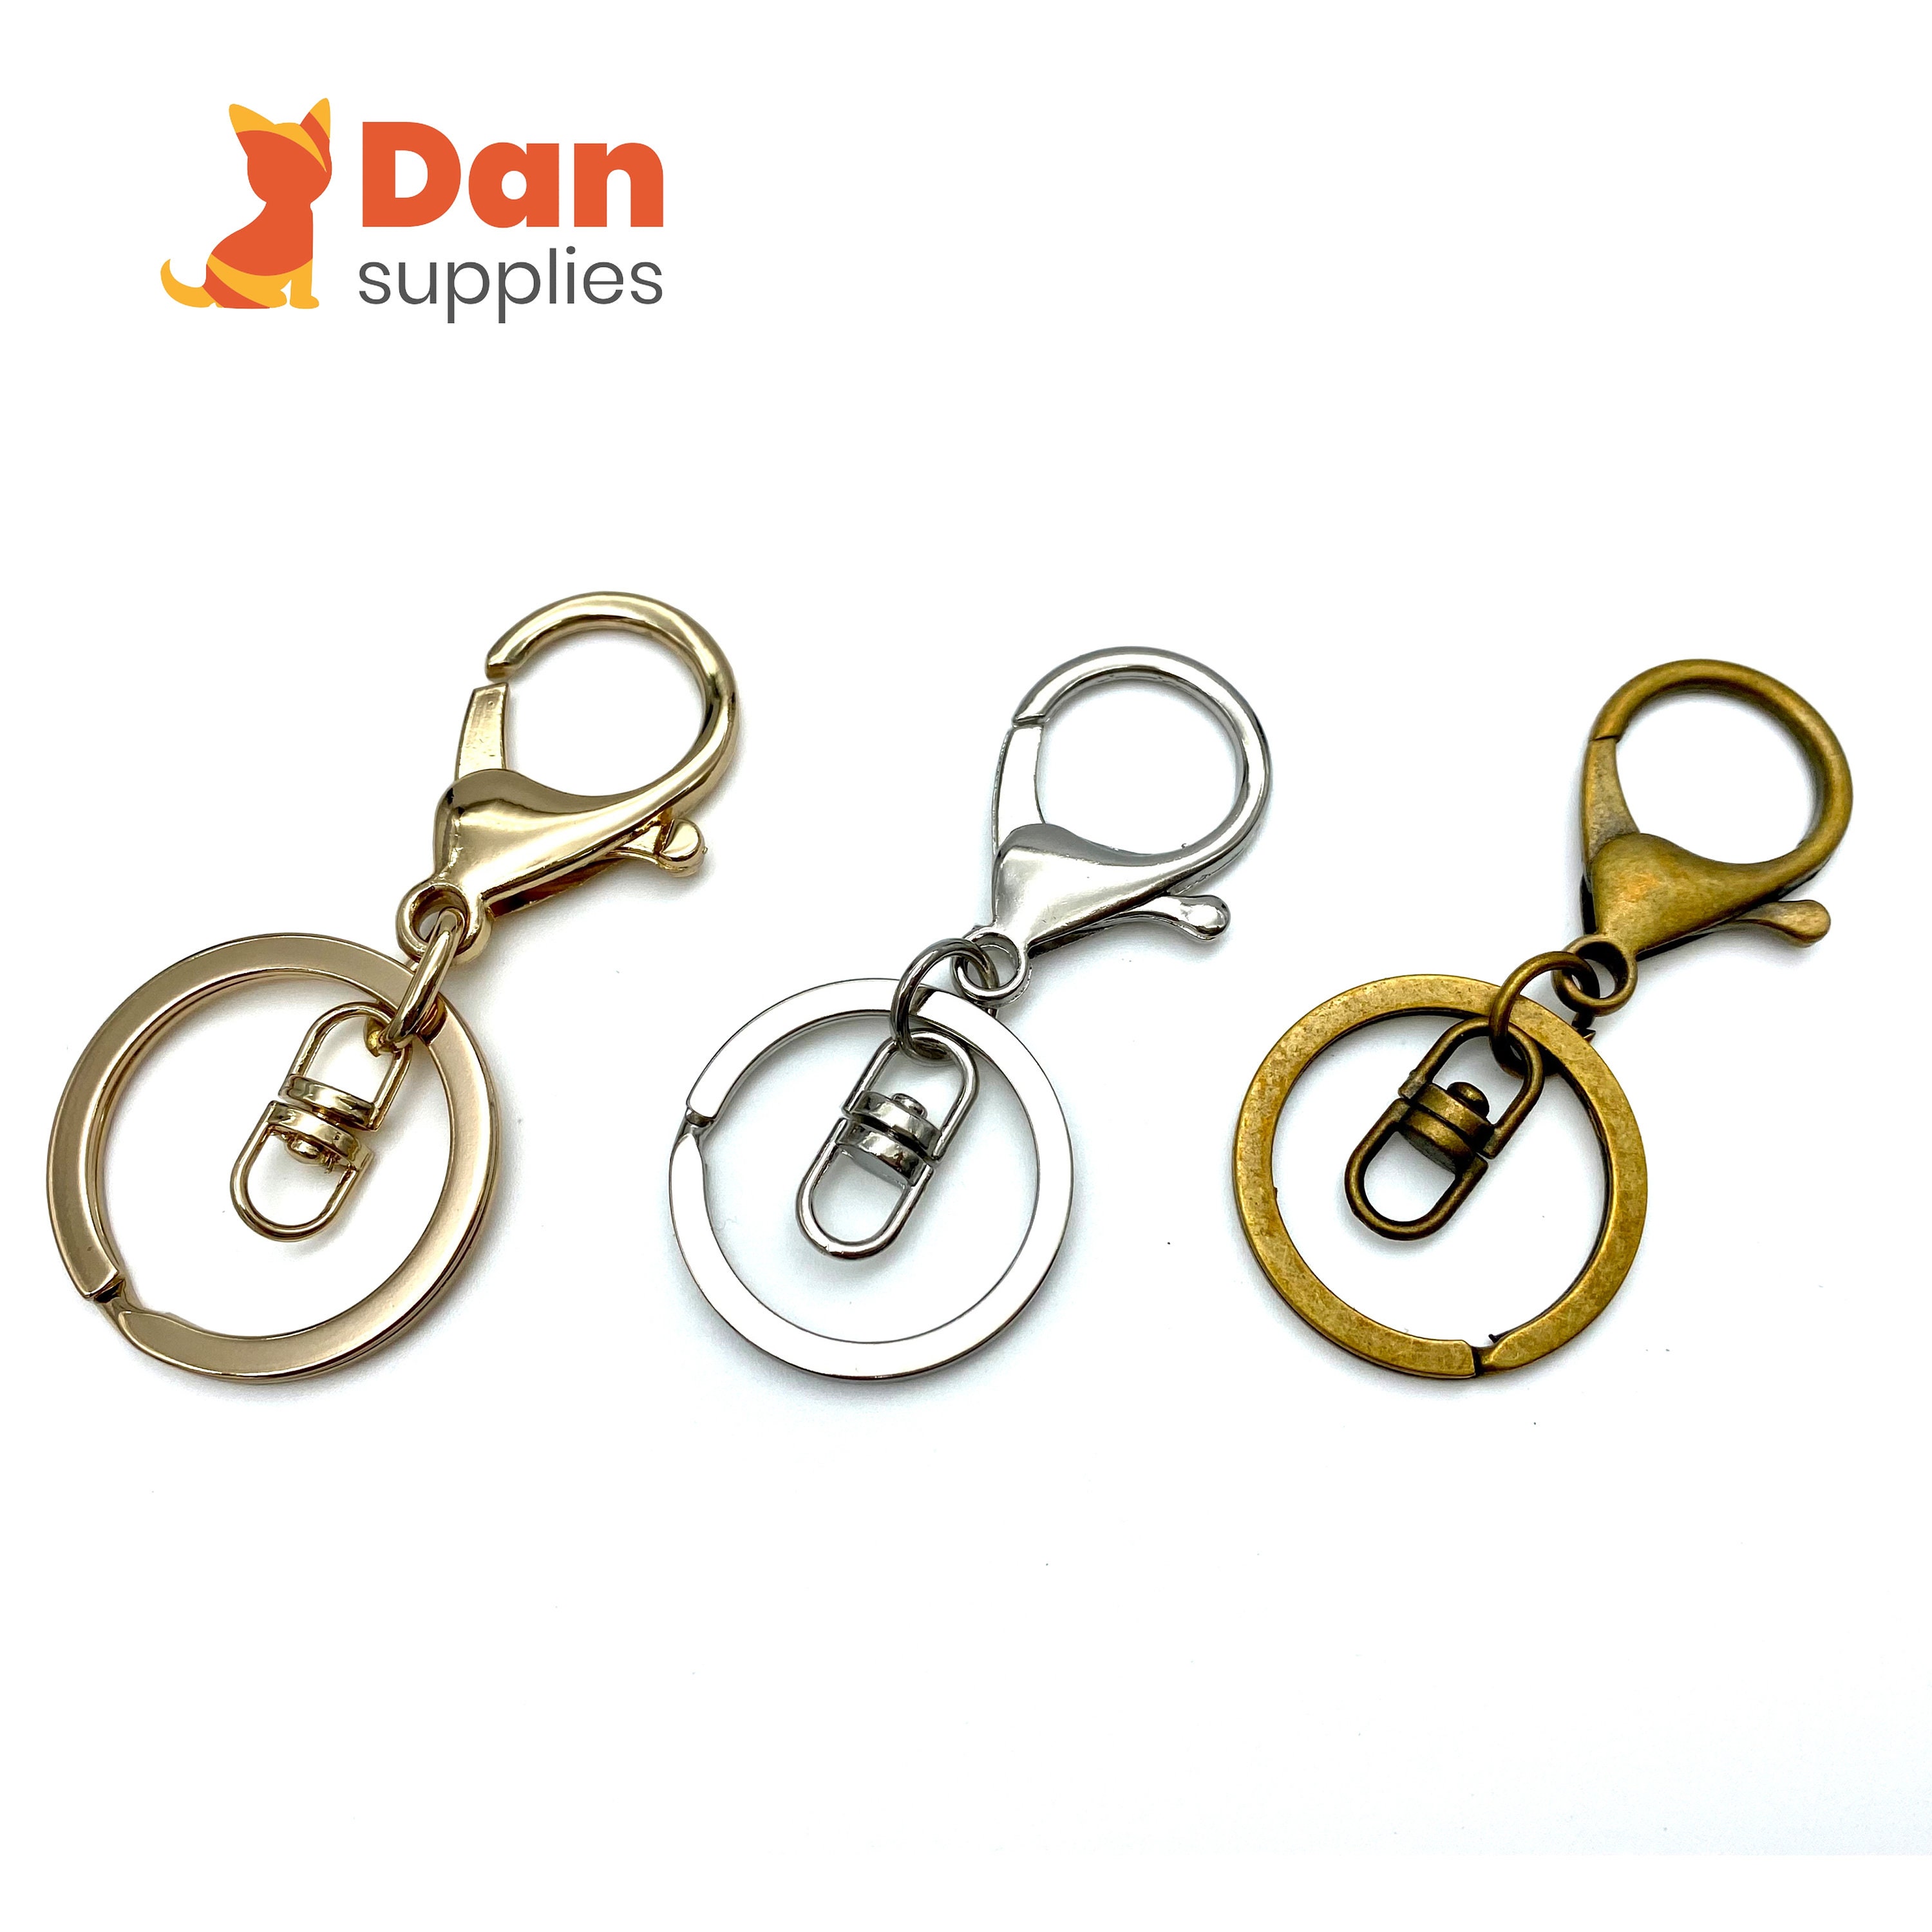 6PCS Colorful Key Chain Ring Metal Lobster Clasp Clips Bag Car Keychain  DIYJewelry Accessories Key Hooks Hook Up Base